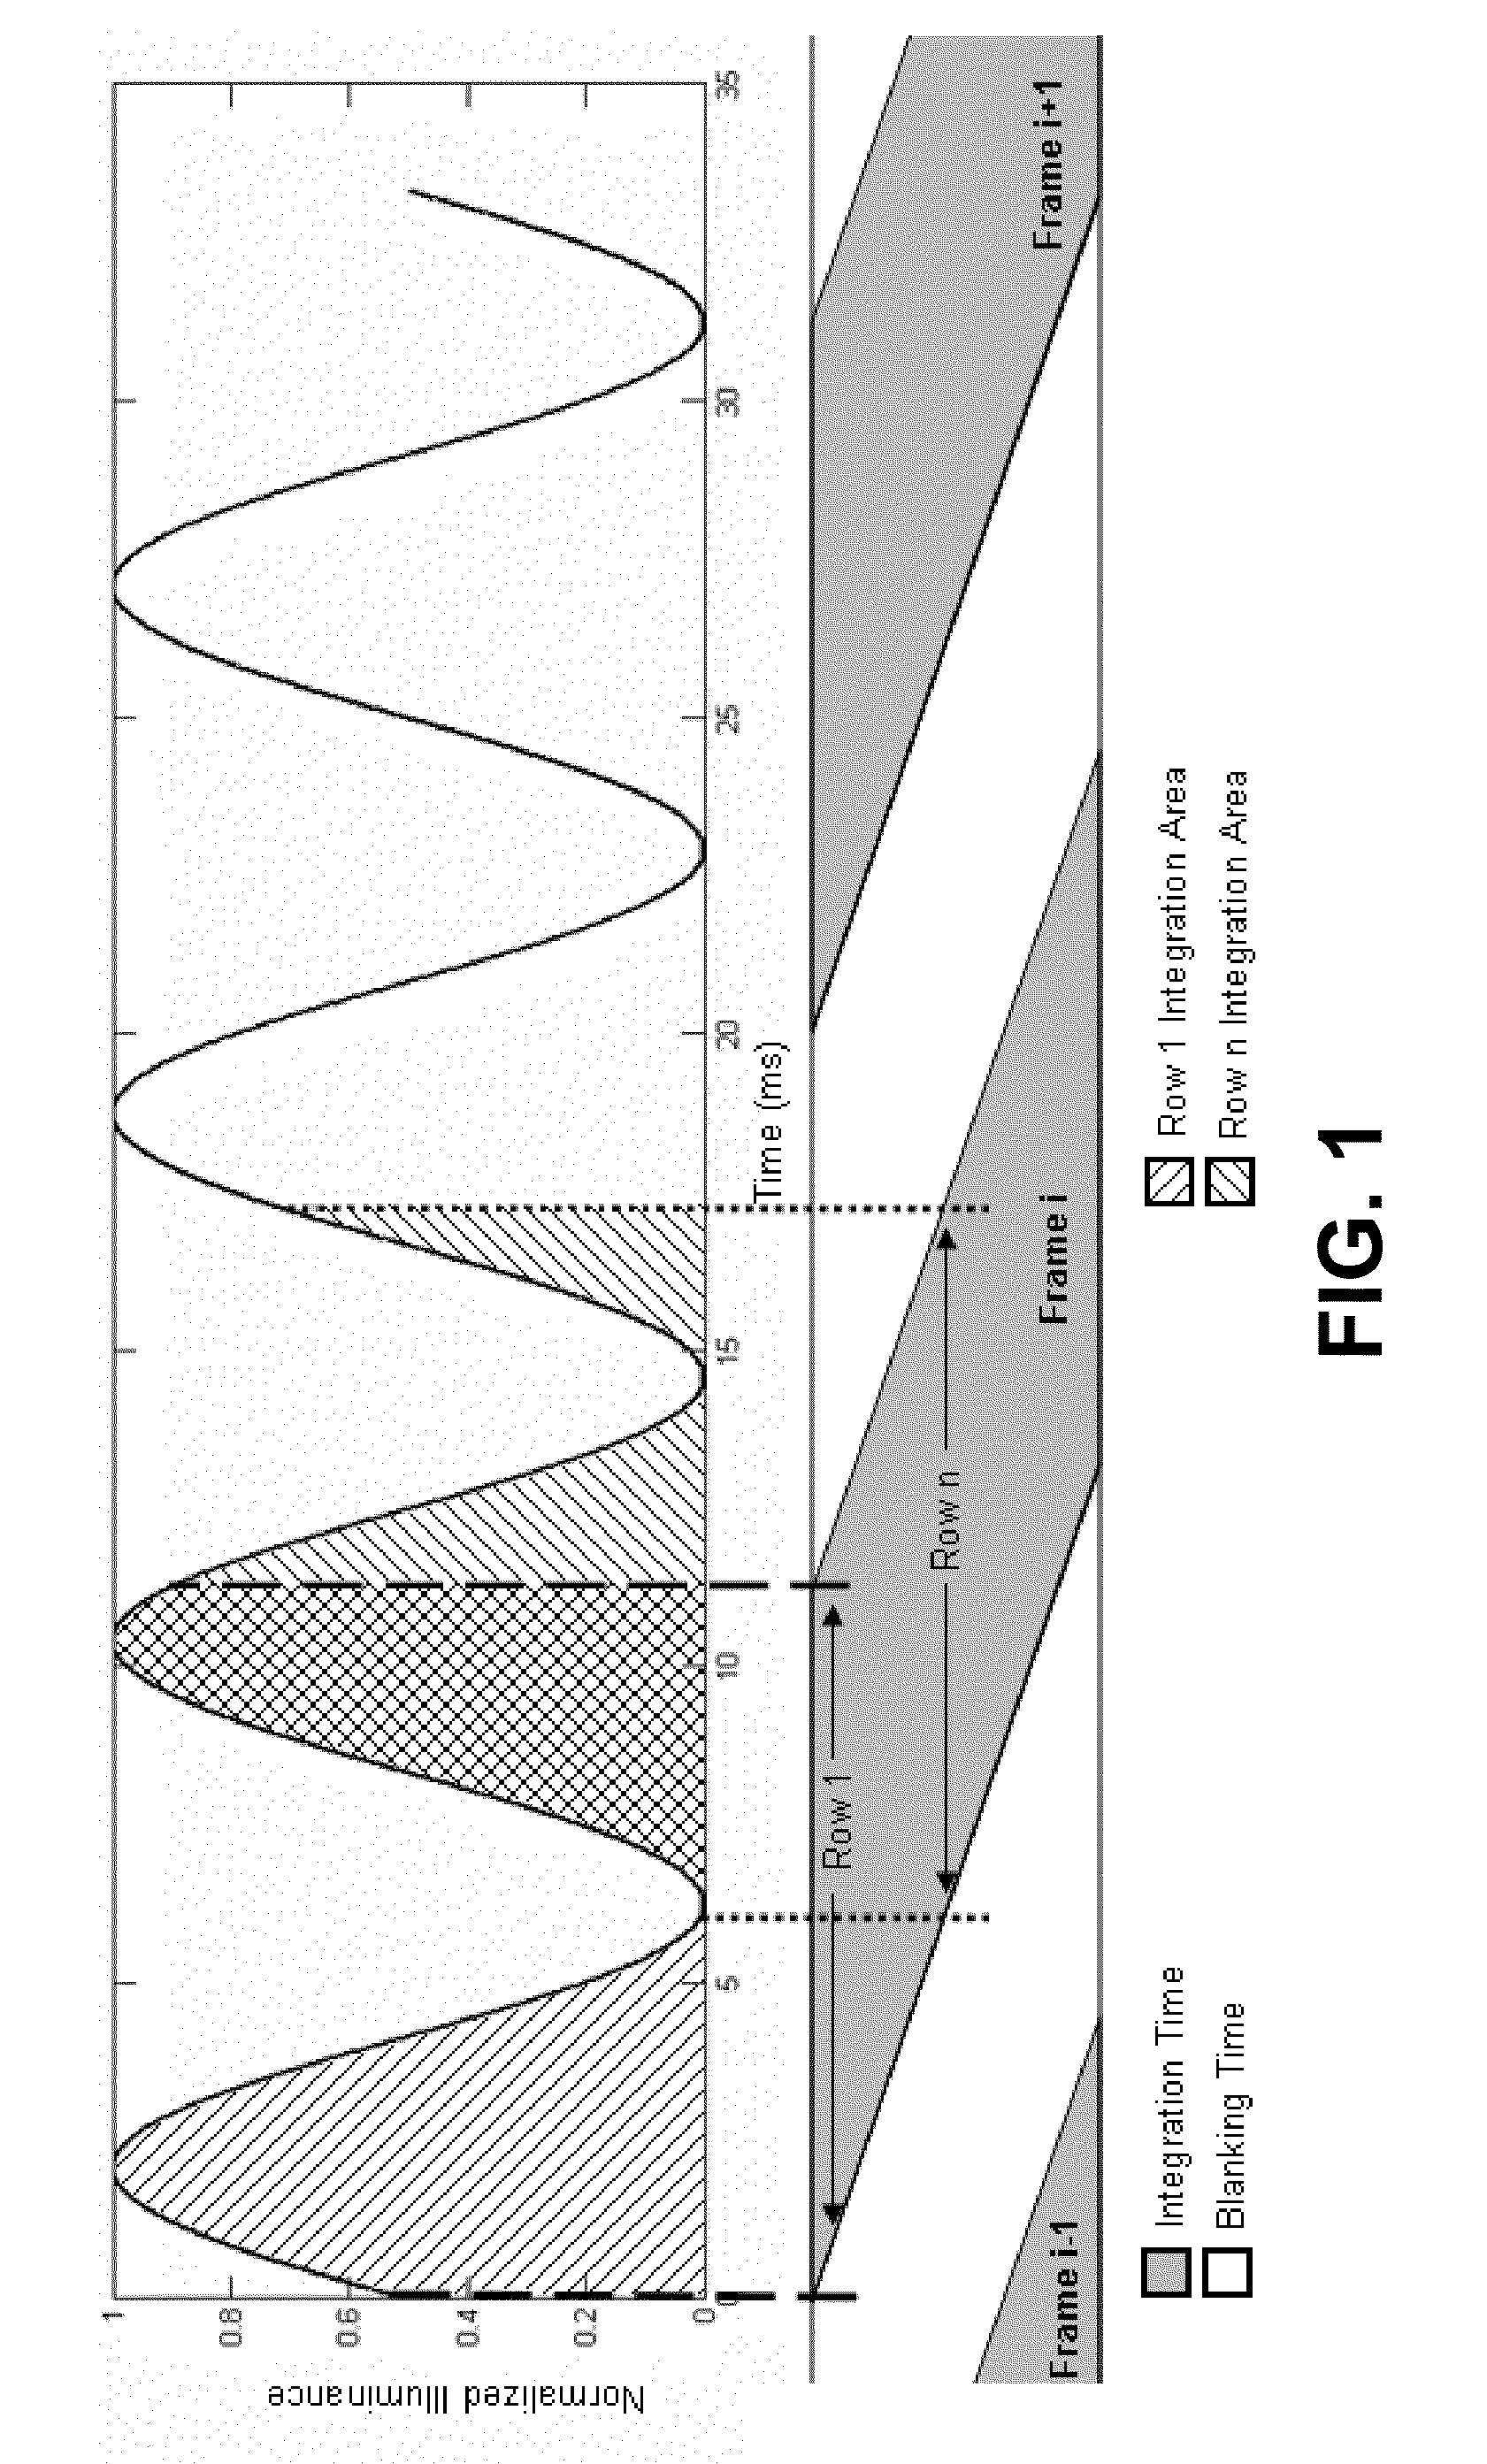 Flicker Detection Circuit for Imaging Sensors that Employ Rolling Shutters